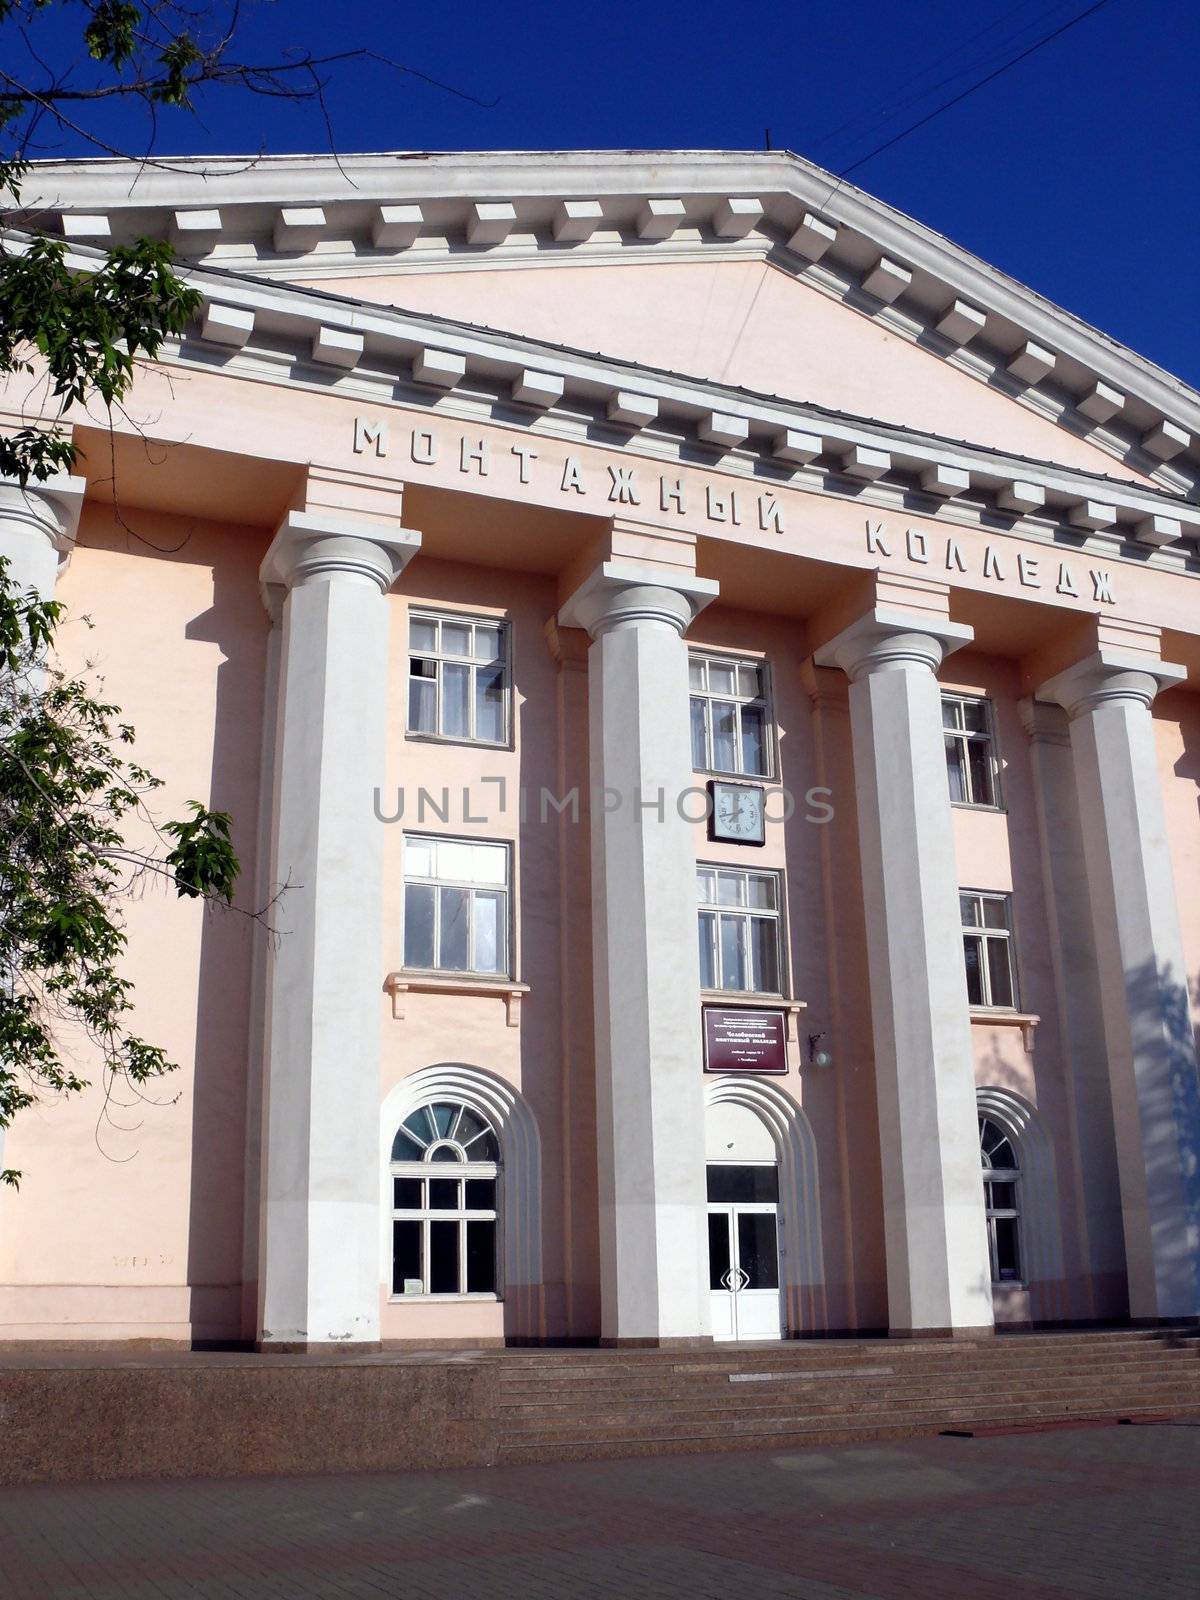 college of assembly - Chelyabinsk